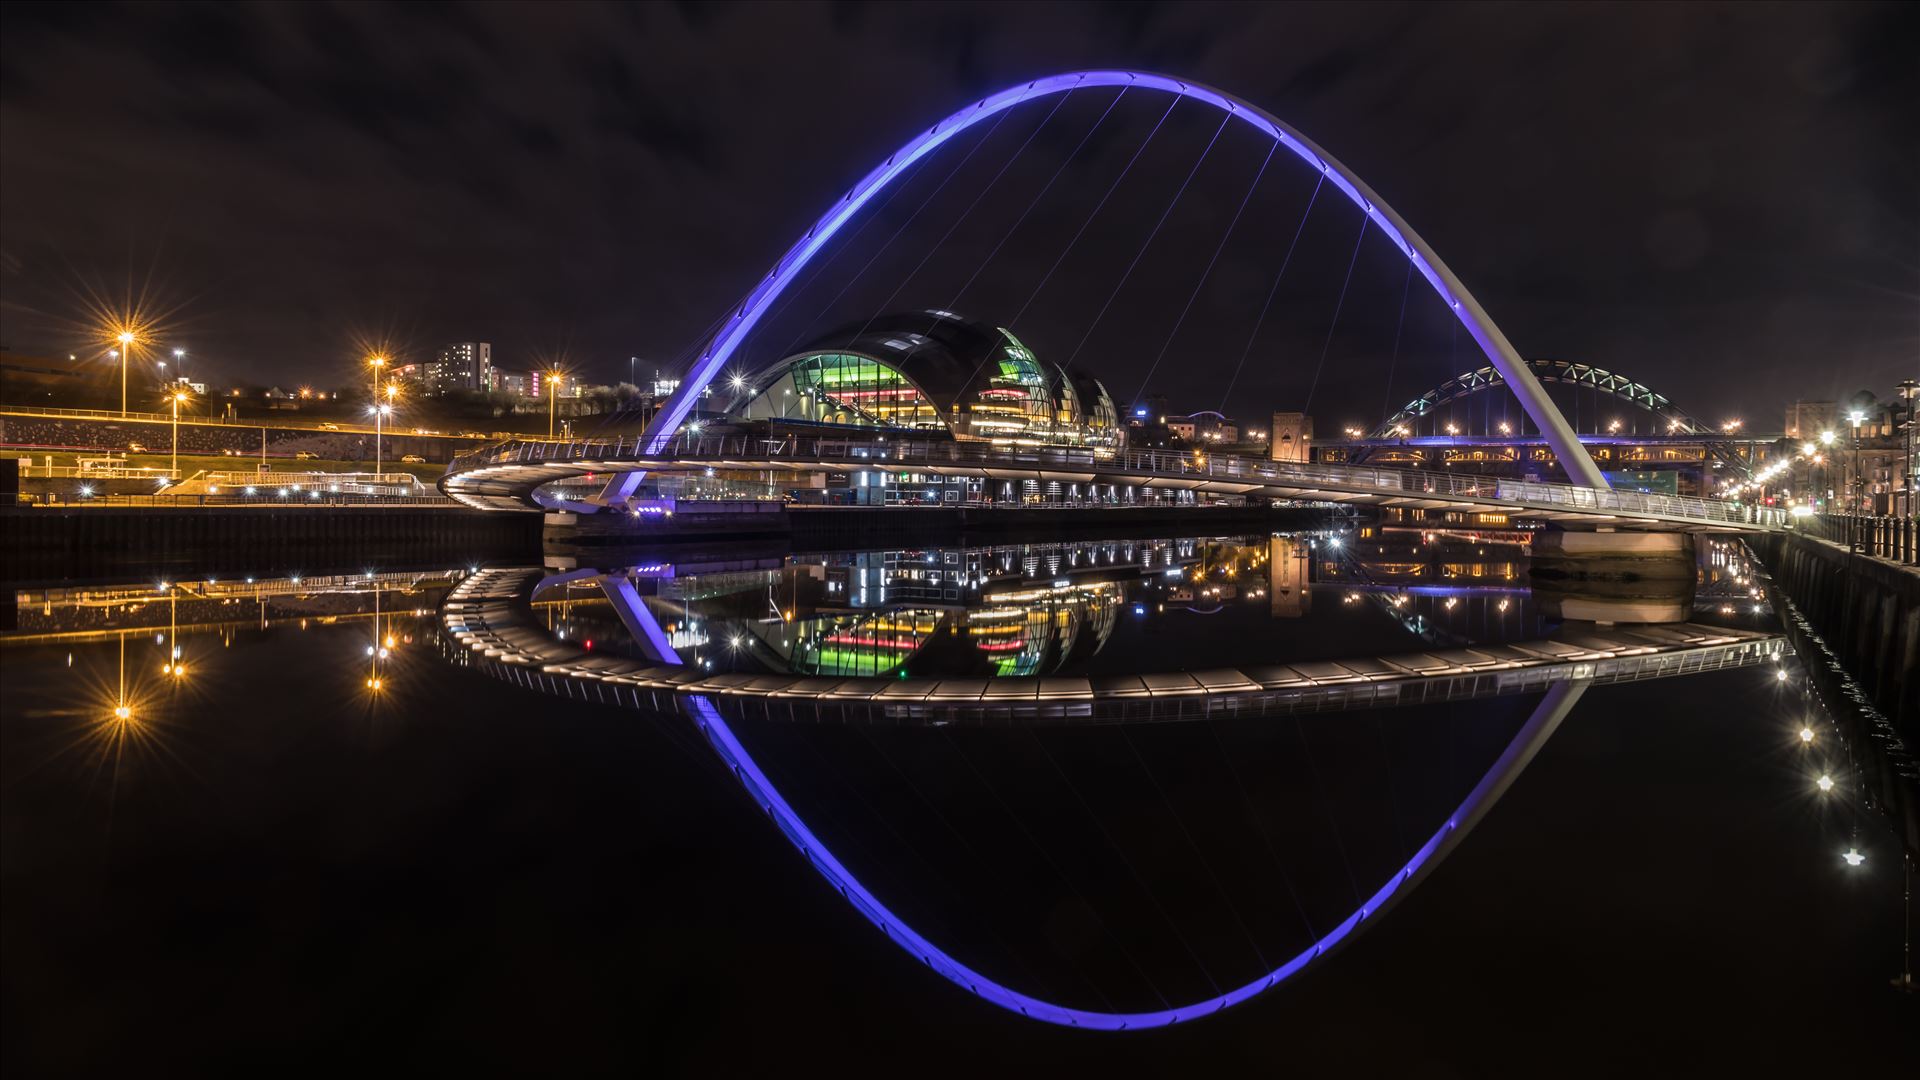 Reflections on the River Tyne 1  by philreay